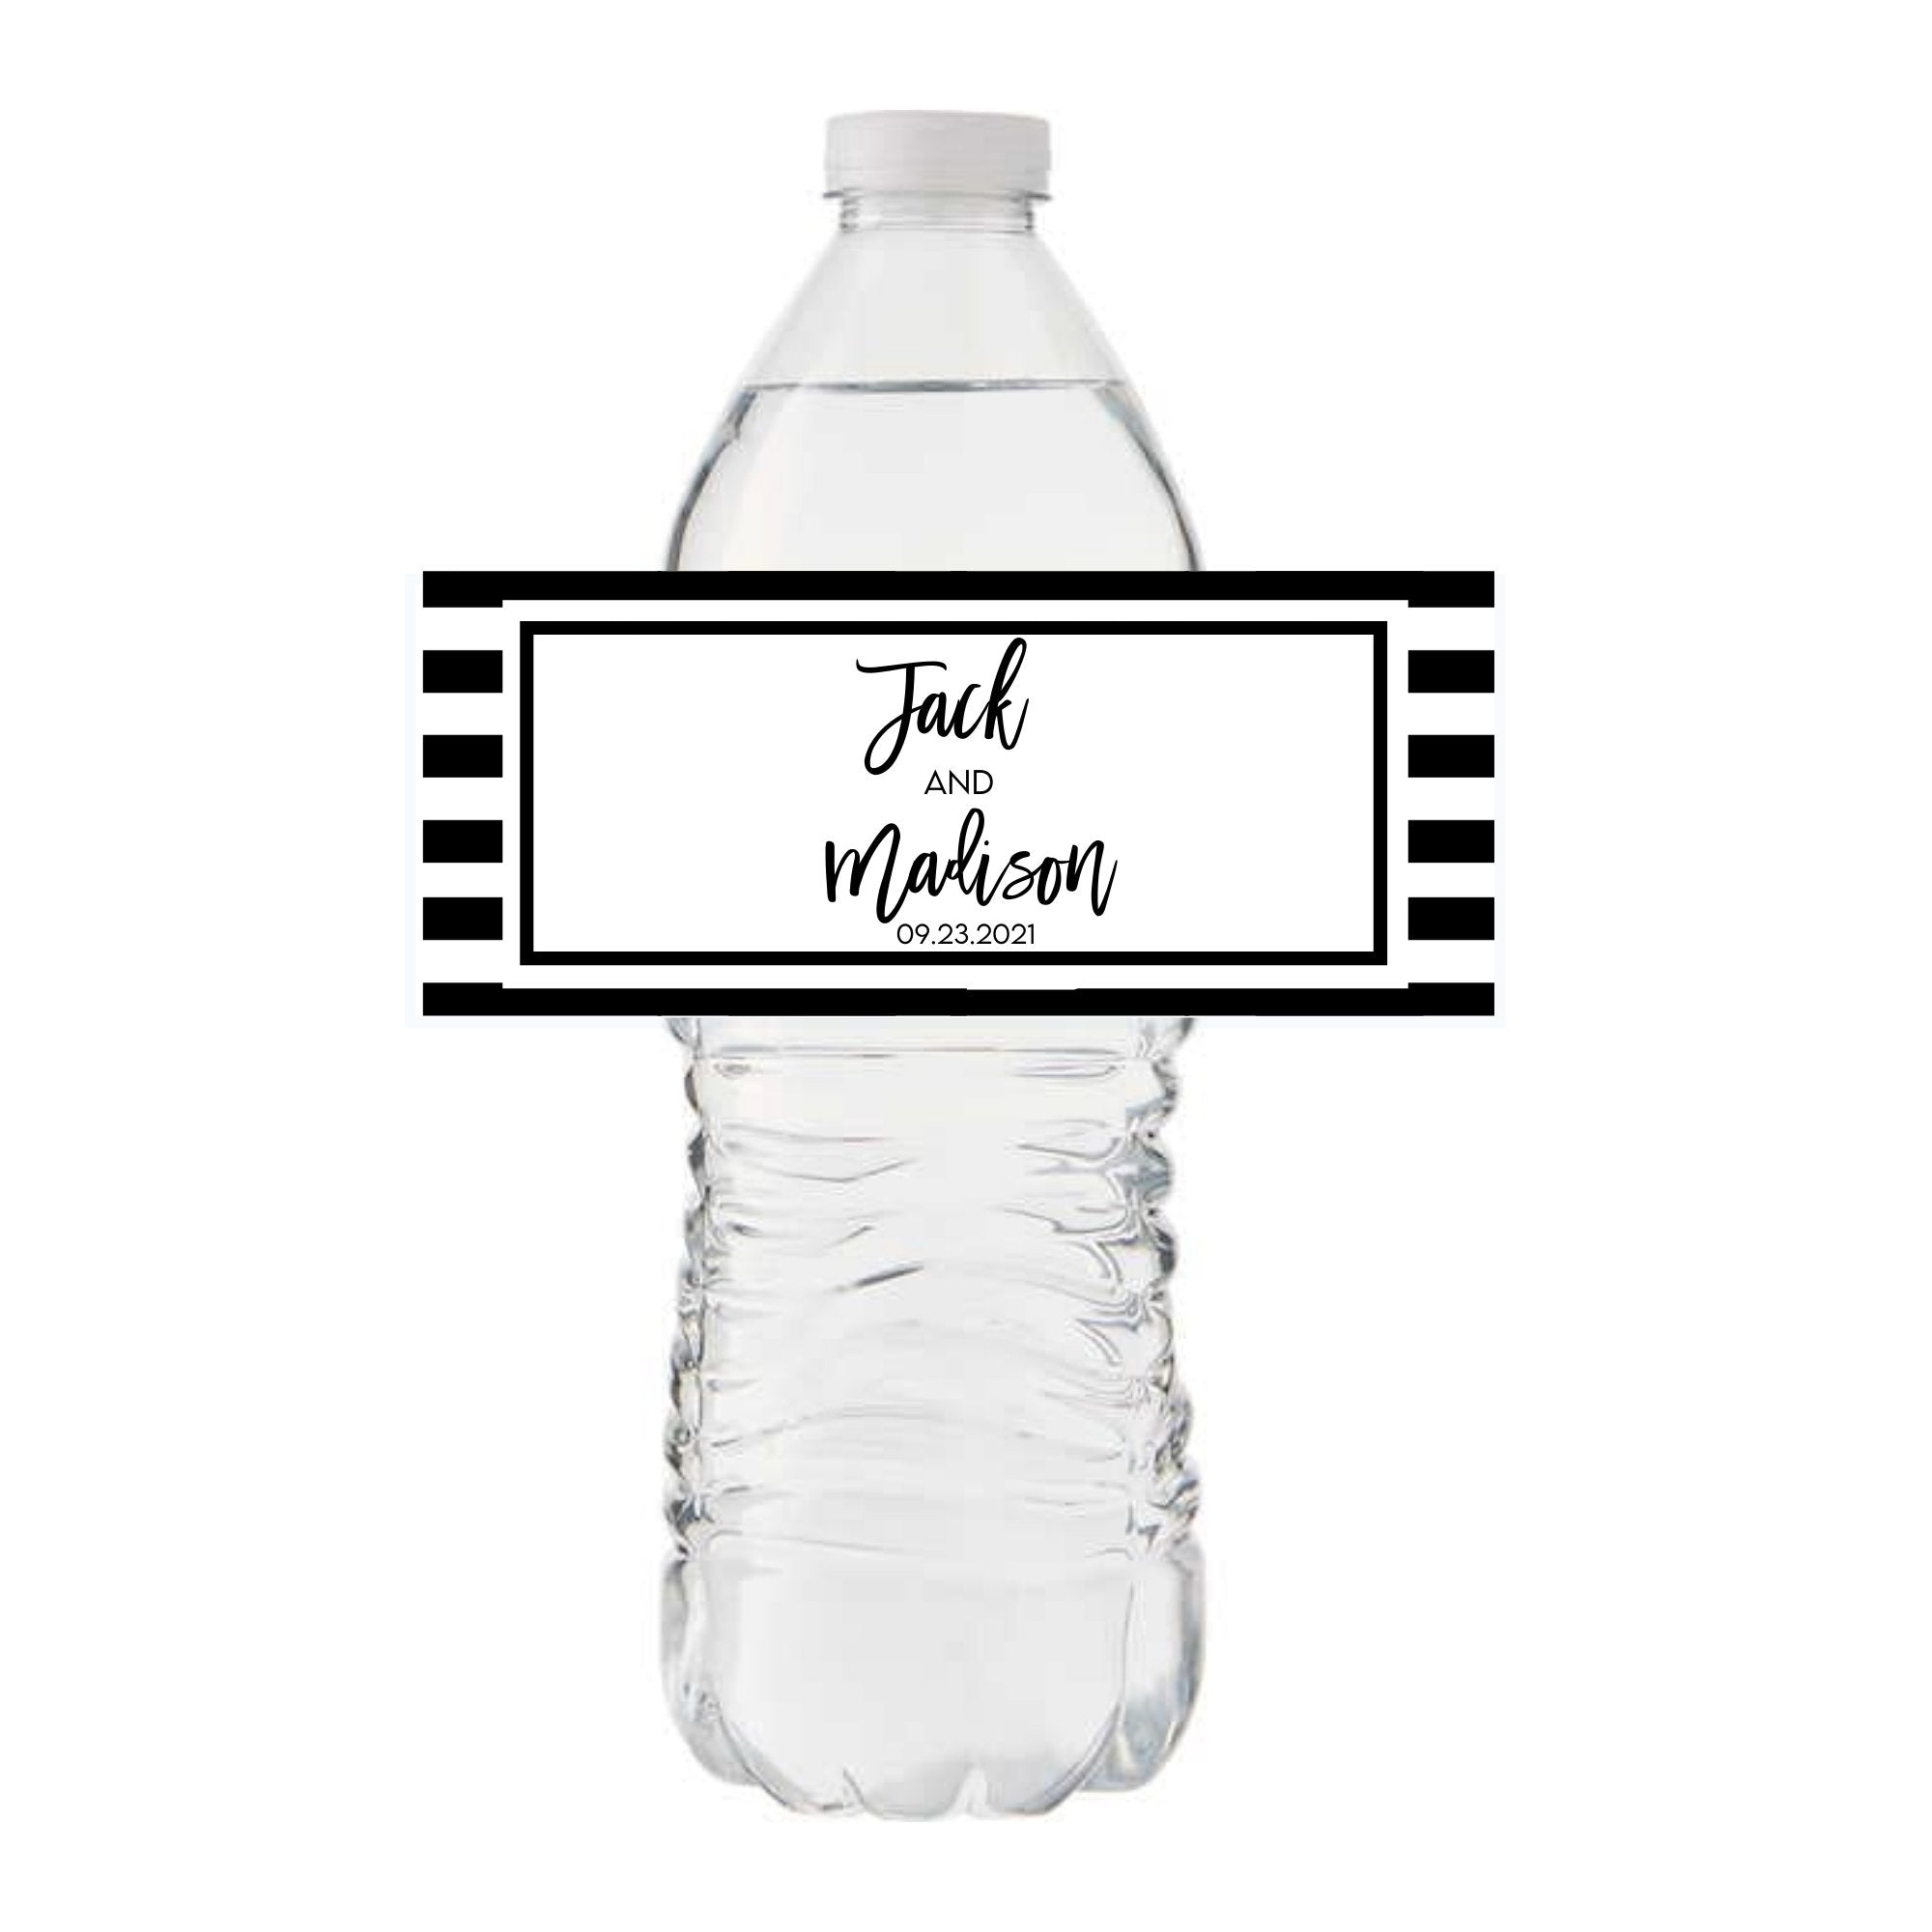 A water bottle is customized with a black and white stripe label